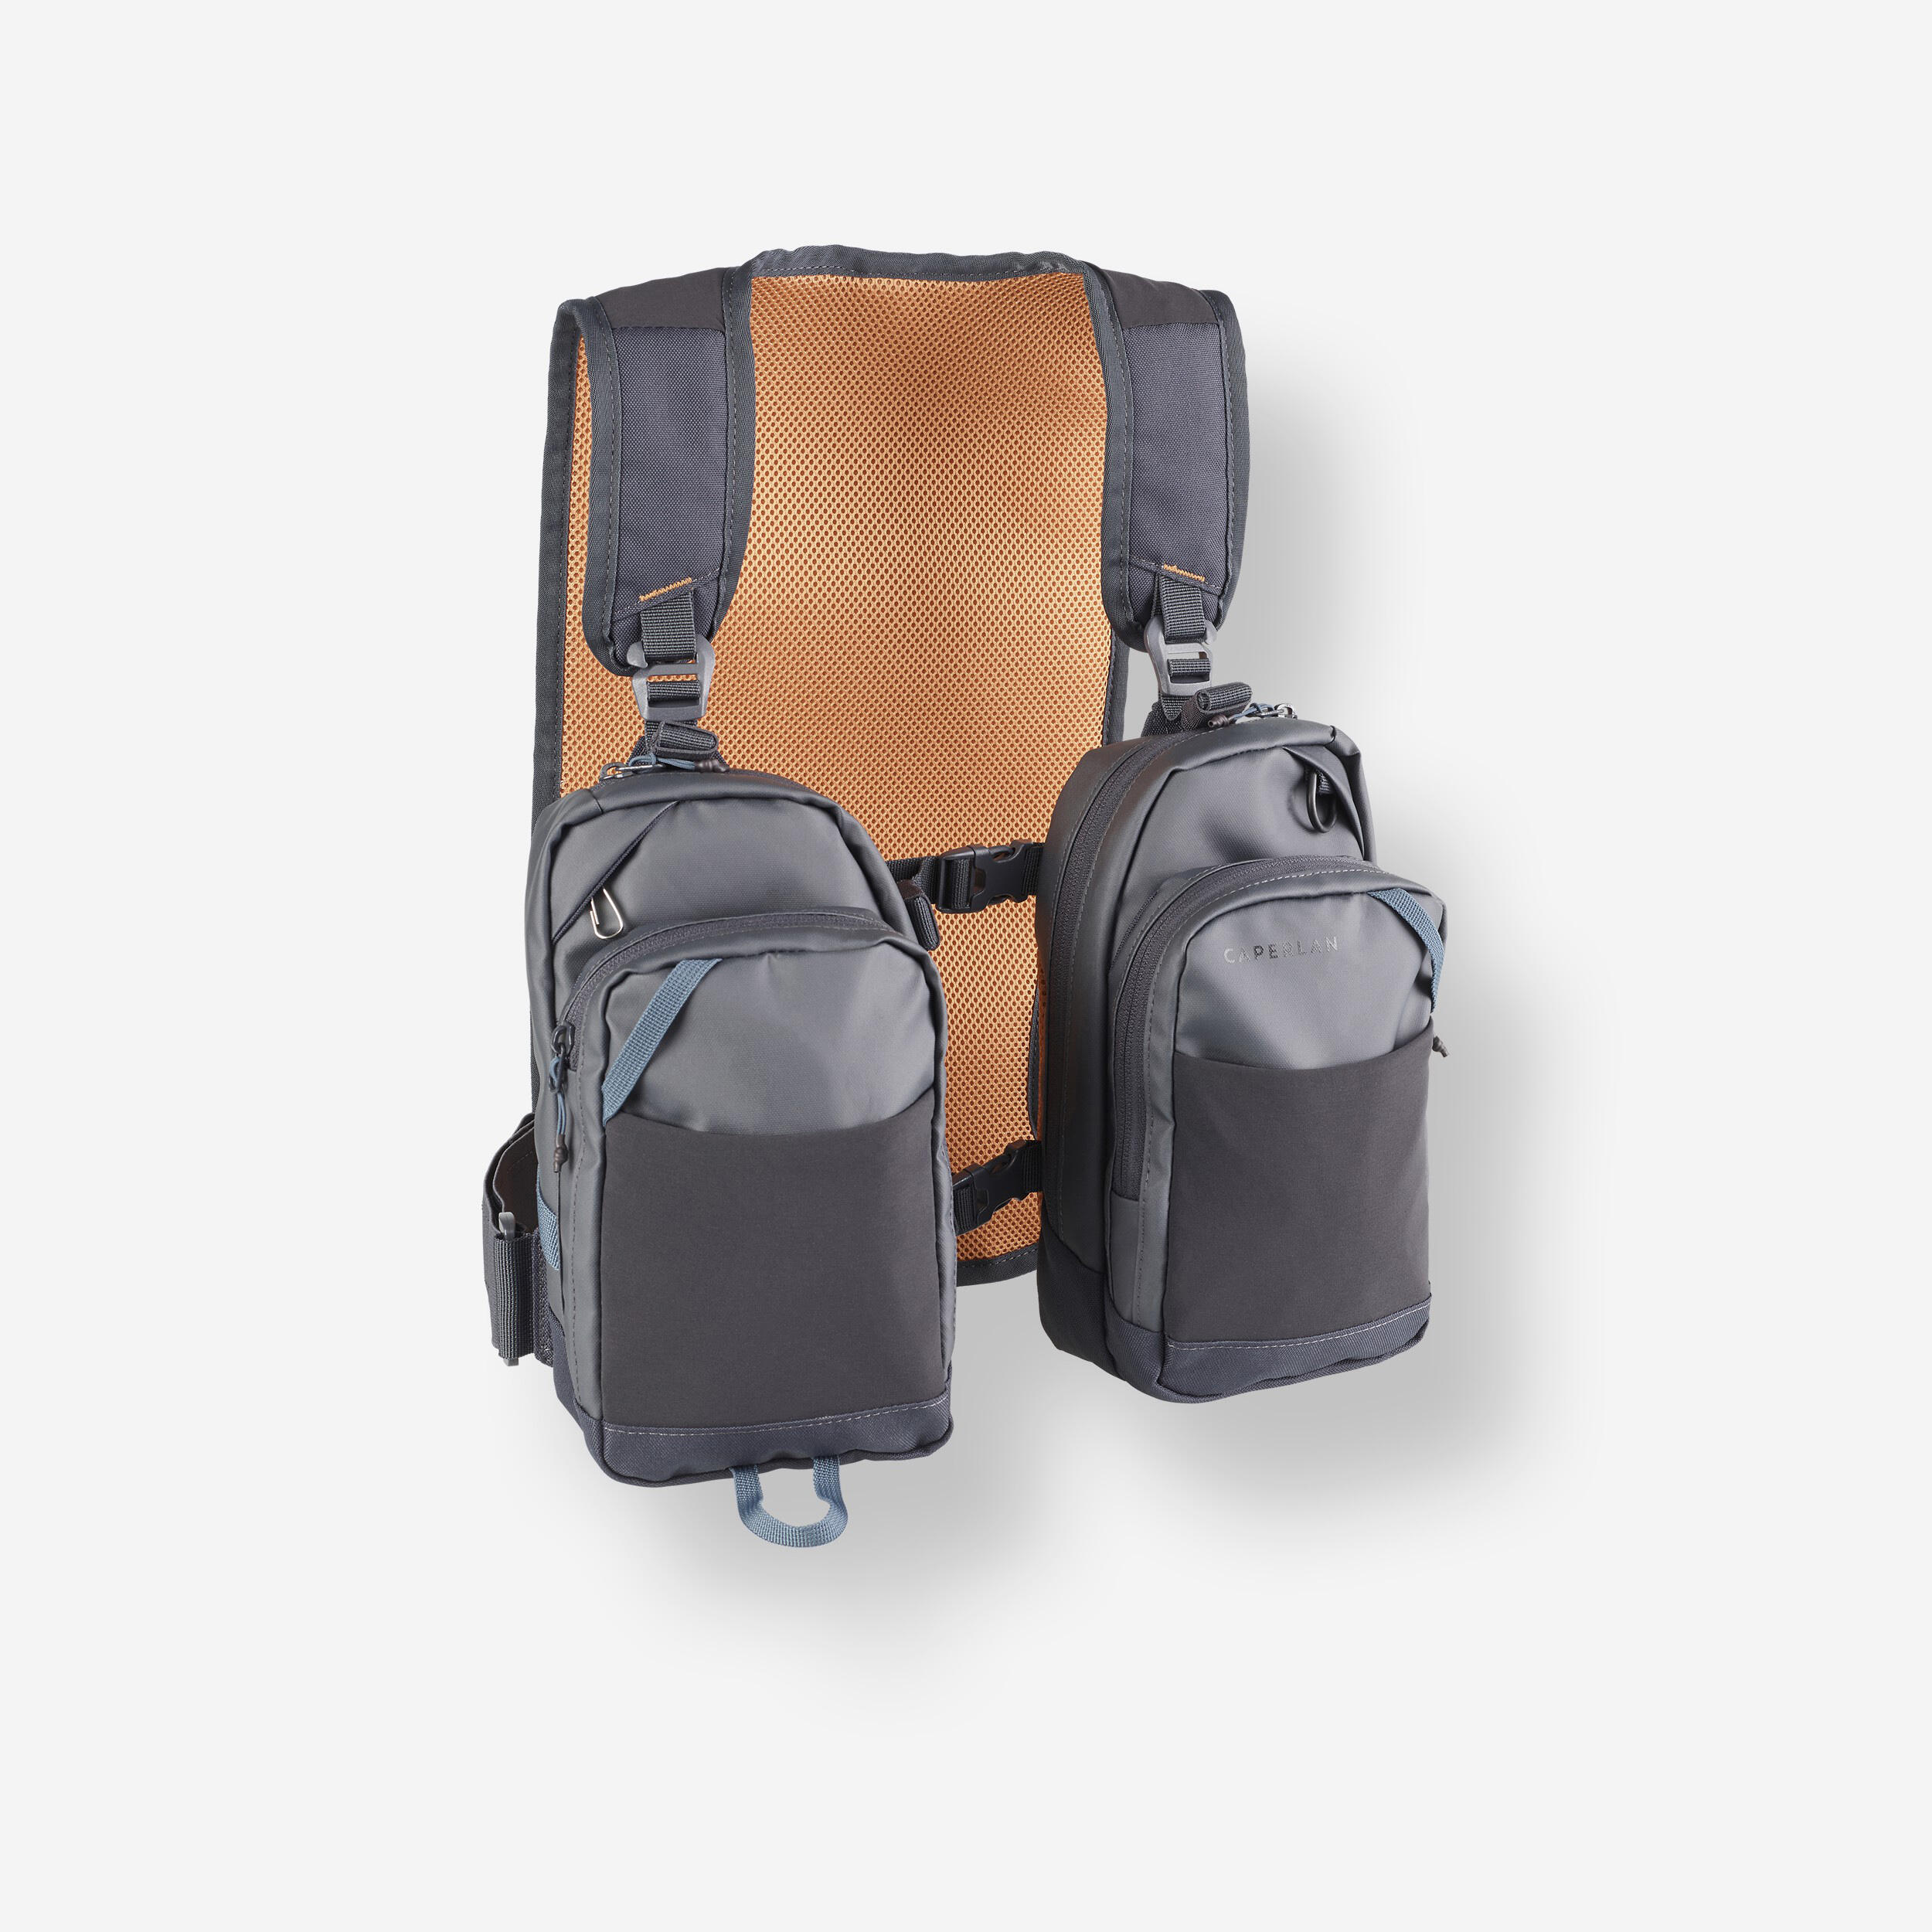 Dual Fishing Chest Pack 500 10 L 1/20